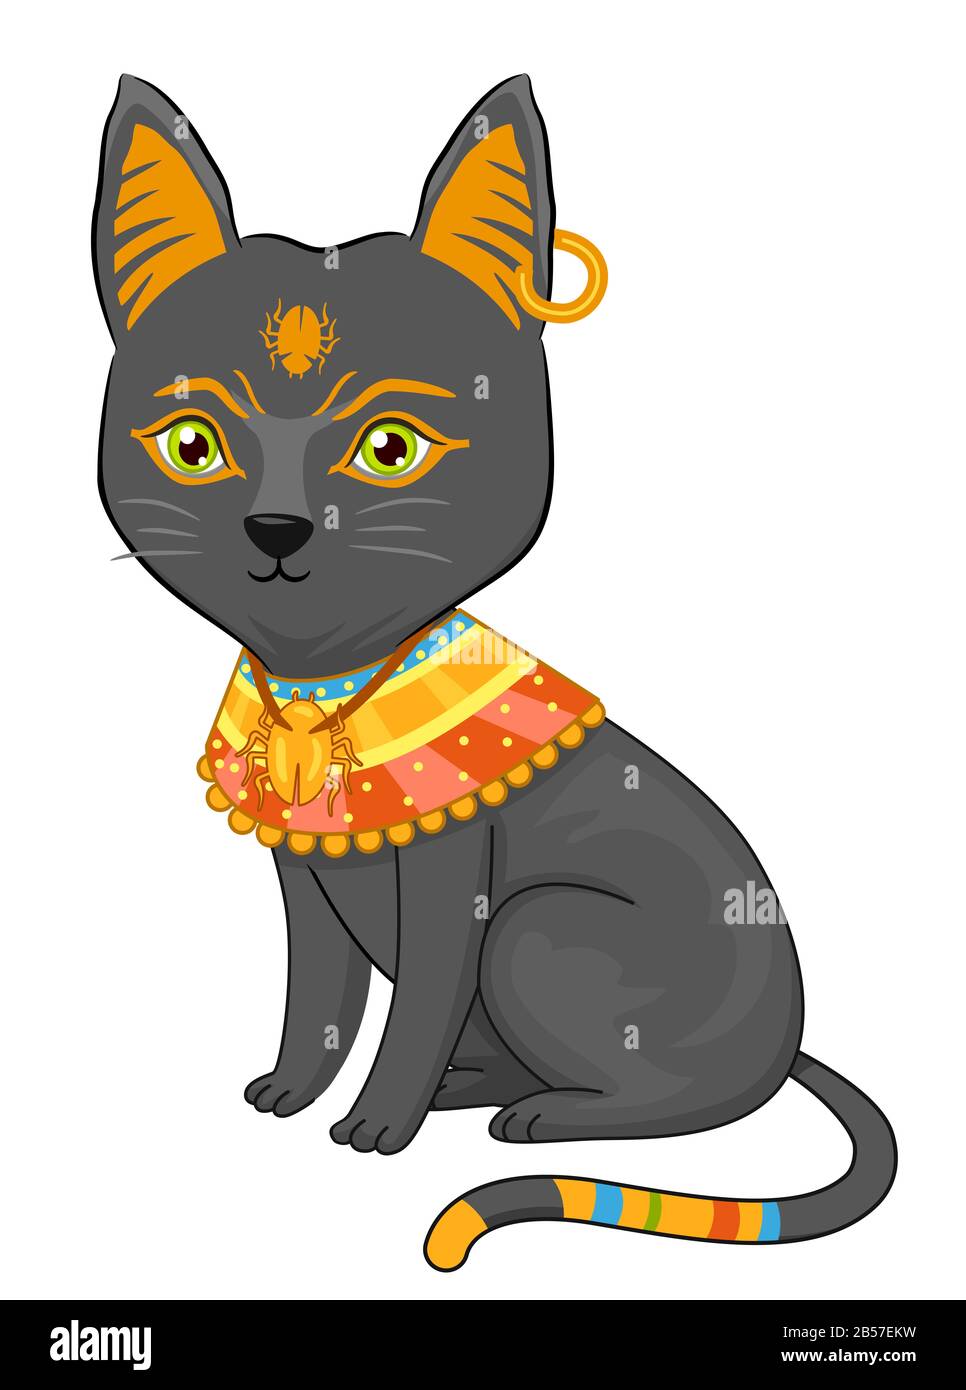 Illustration of a Black Cat Sitting Down and Wearing Egyptian Cat Bastet Costume Stock Photo